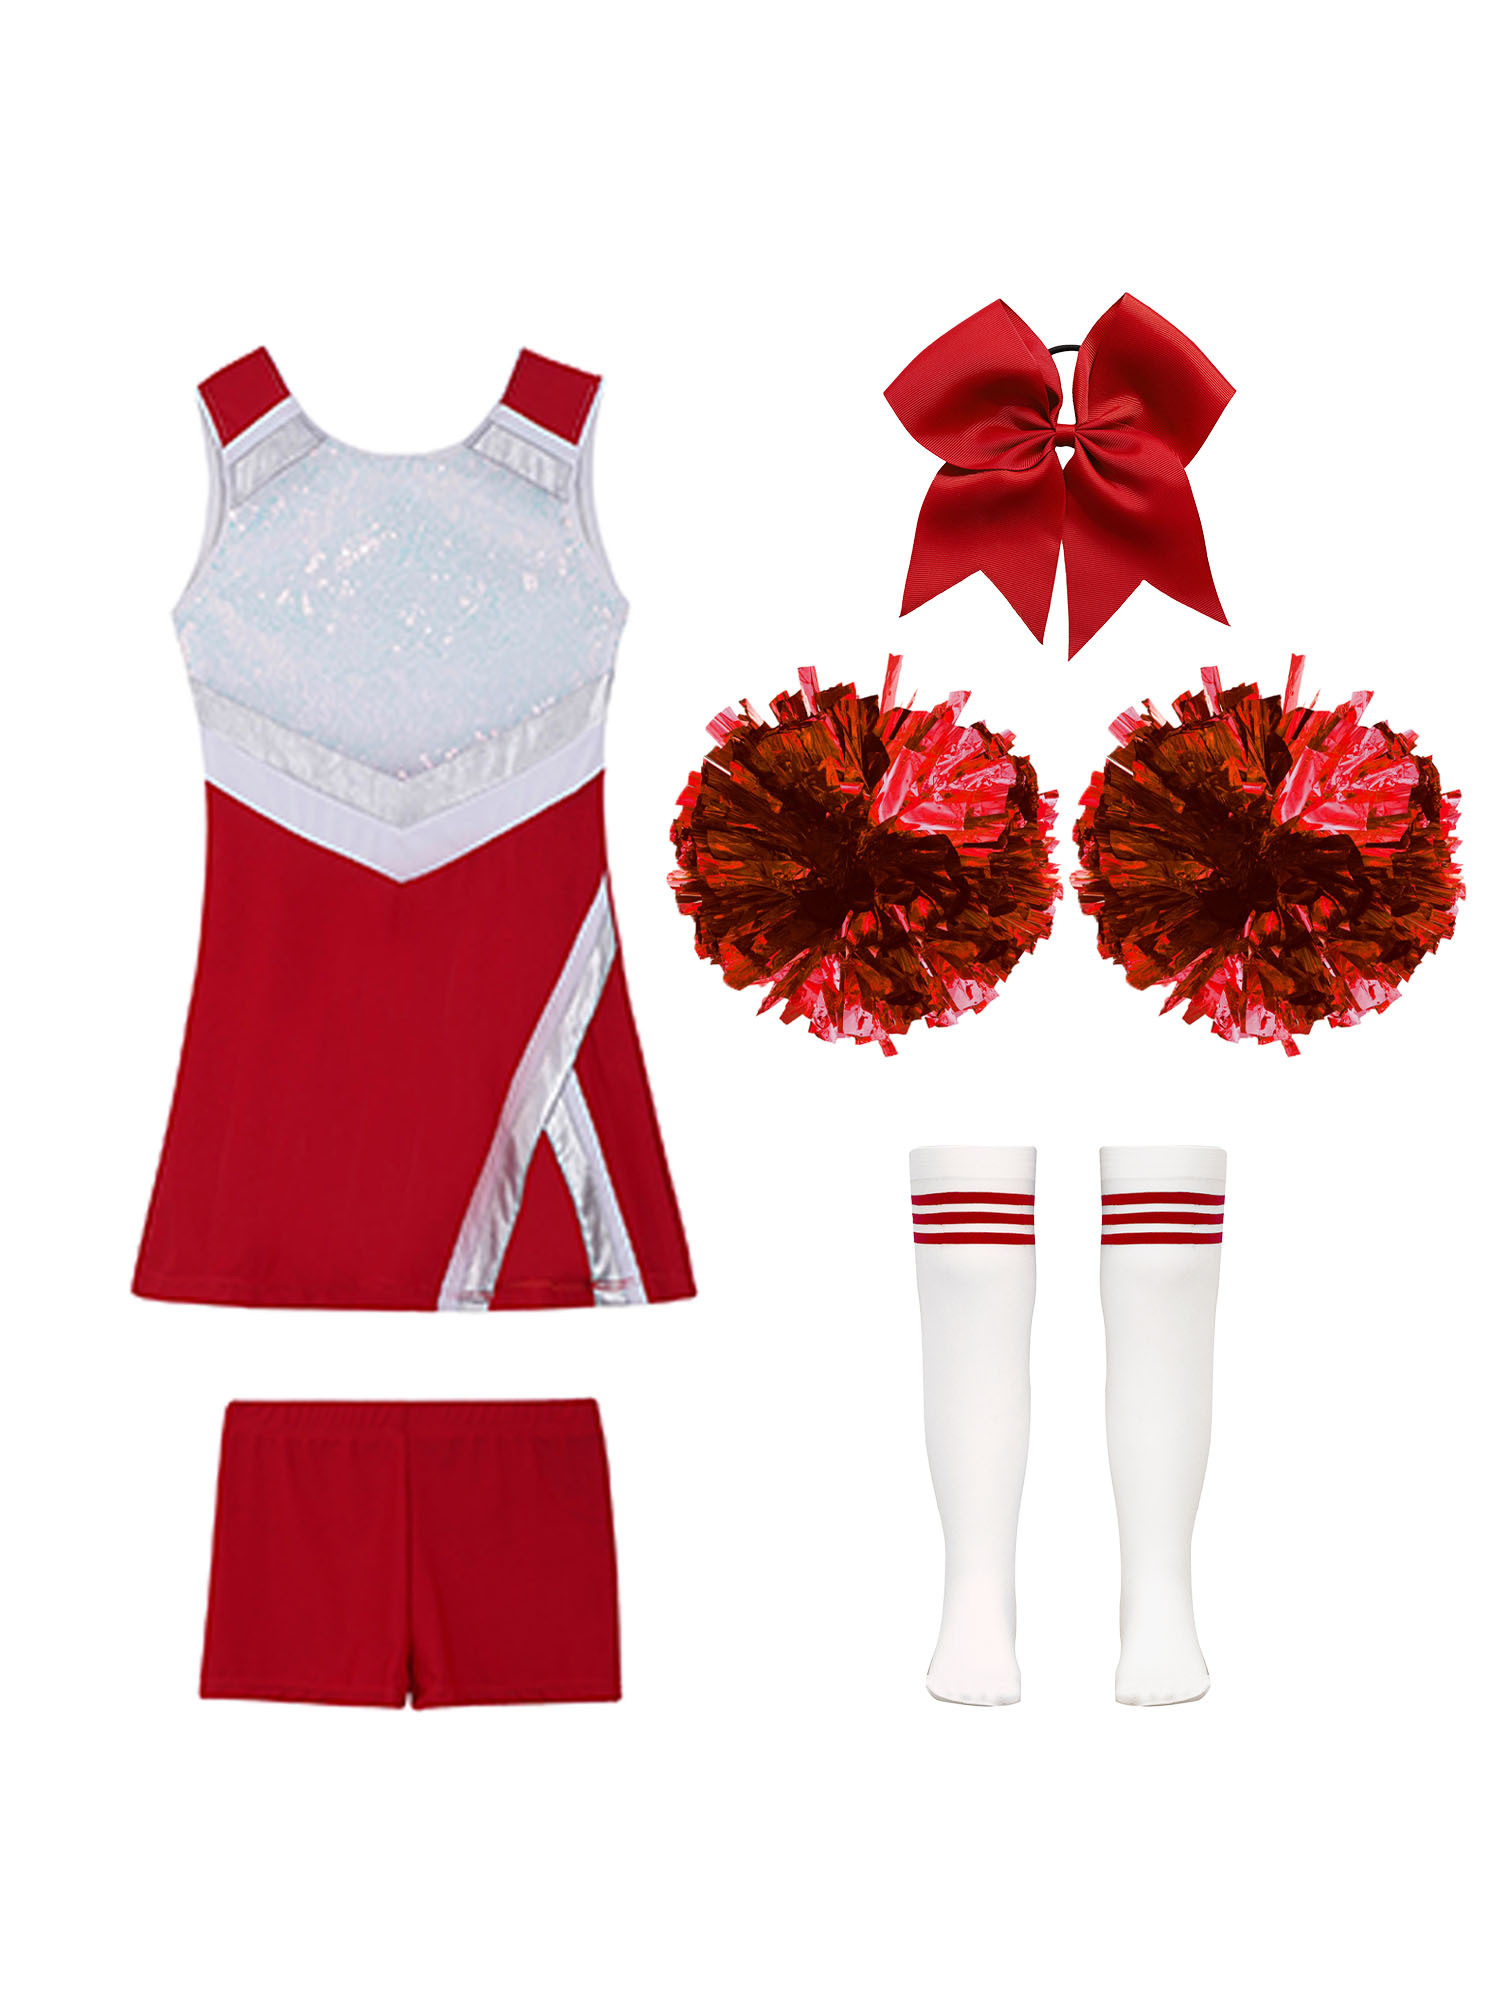 TiaoBug Kids Girls Cheer Leader Uniform Sports Games Cheerleading Dance Outfits Halloween Carnival Fancy Dress Up A Red 12 - image 3 of 5